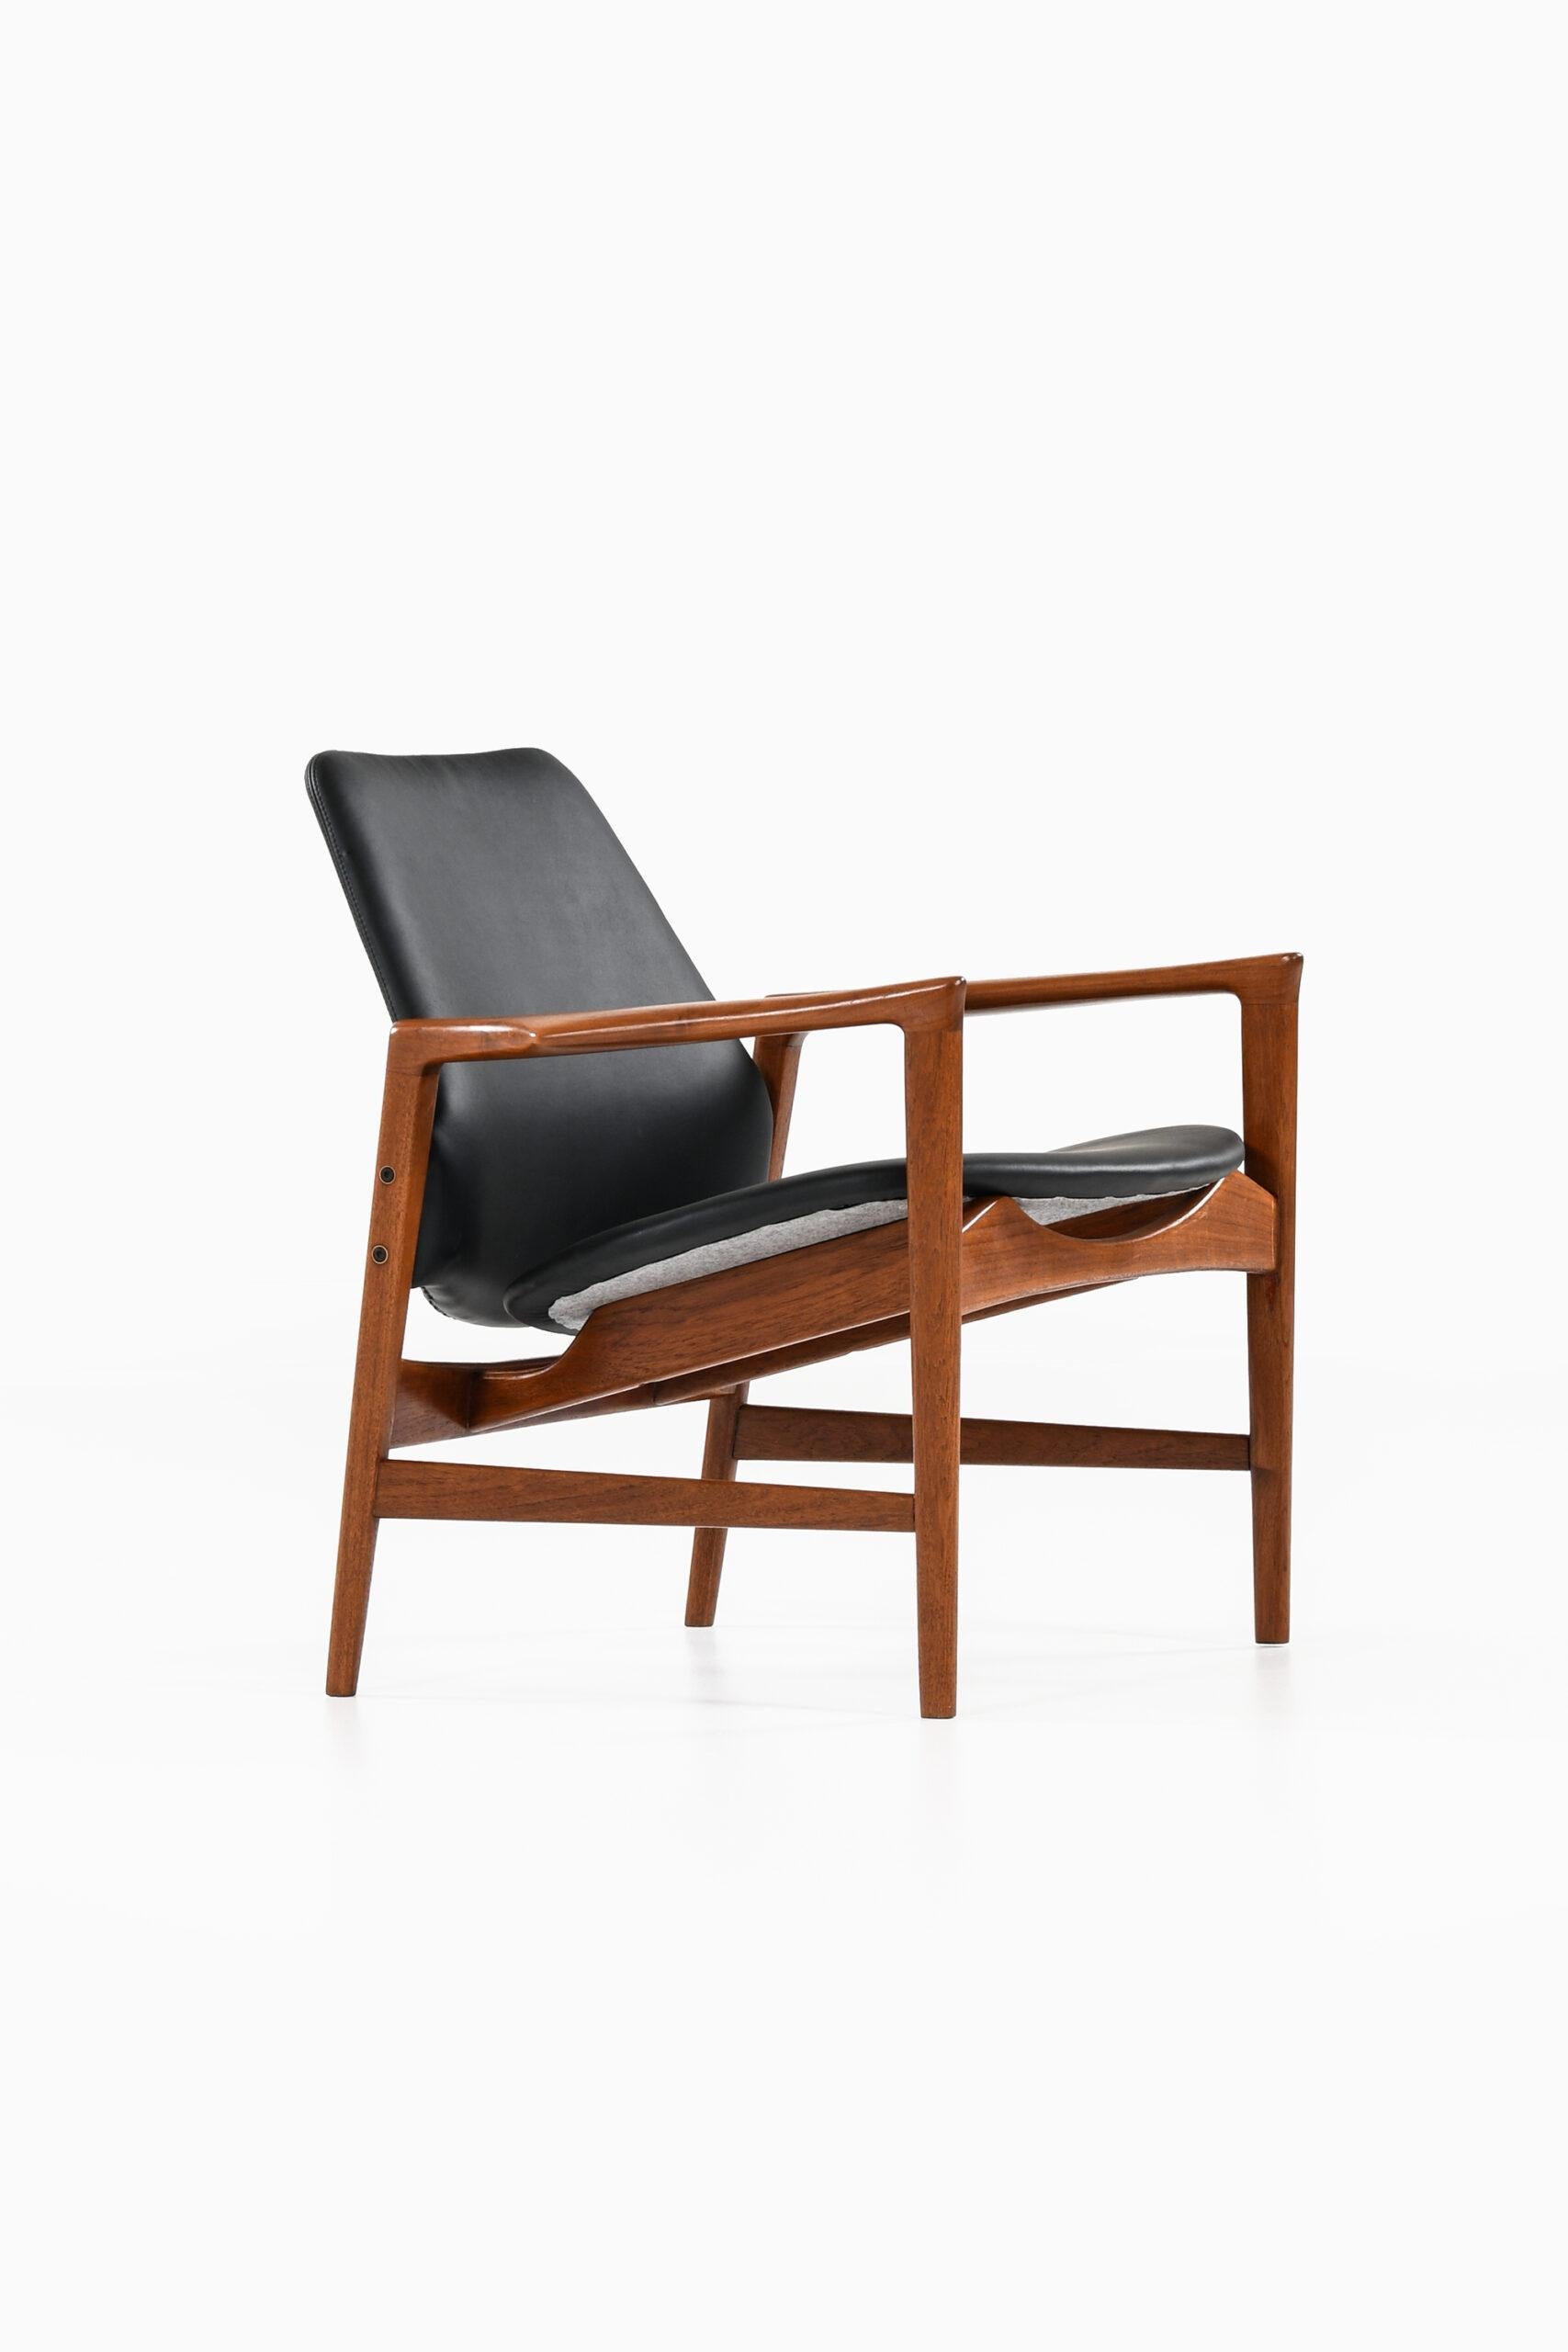 Rare easy chair model Holte designed by Ib Kofod-Larsen. Produced by OPE in Sweden.